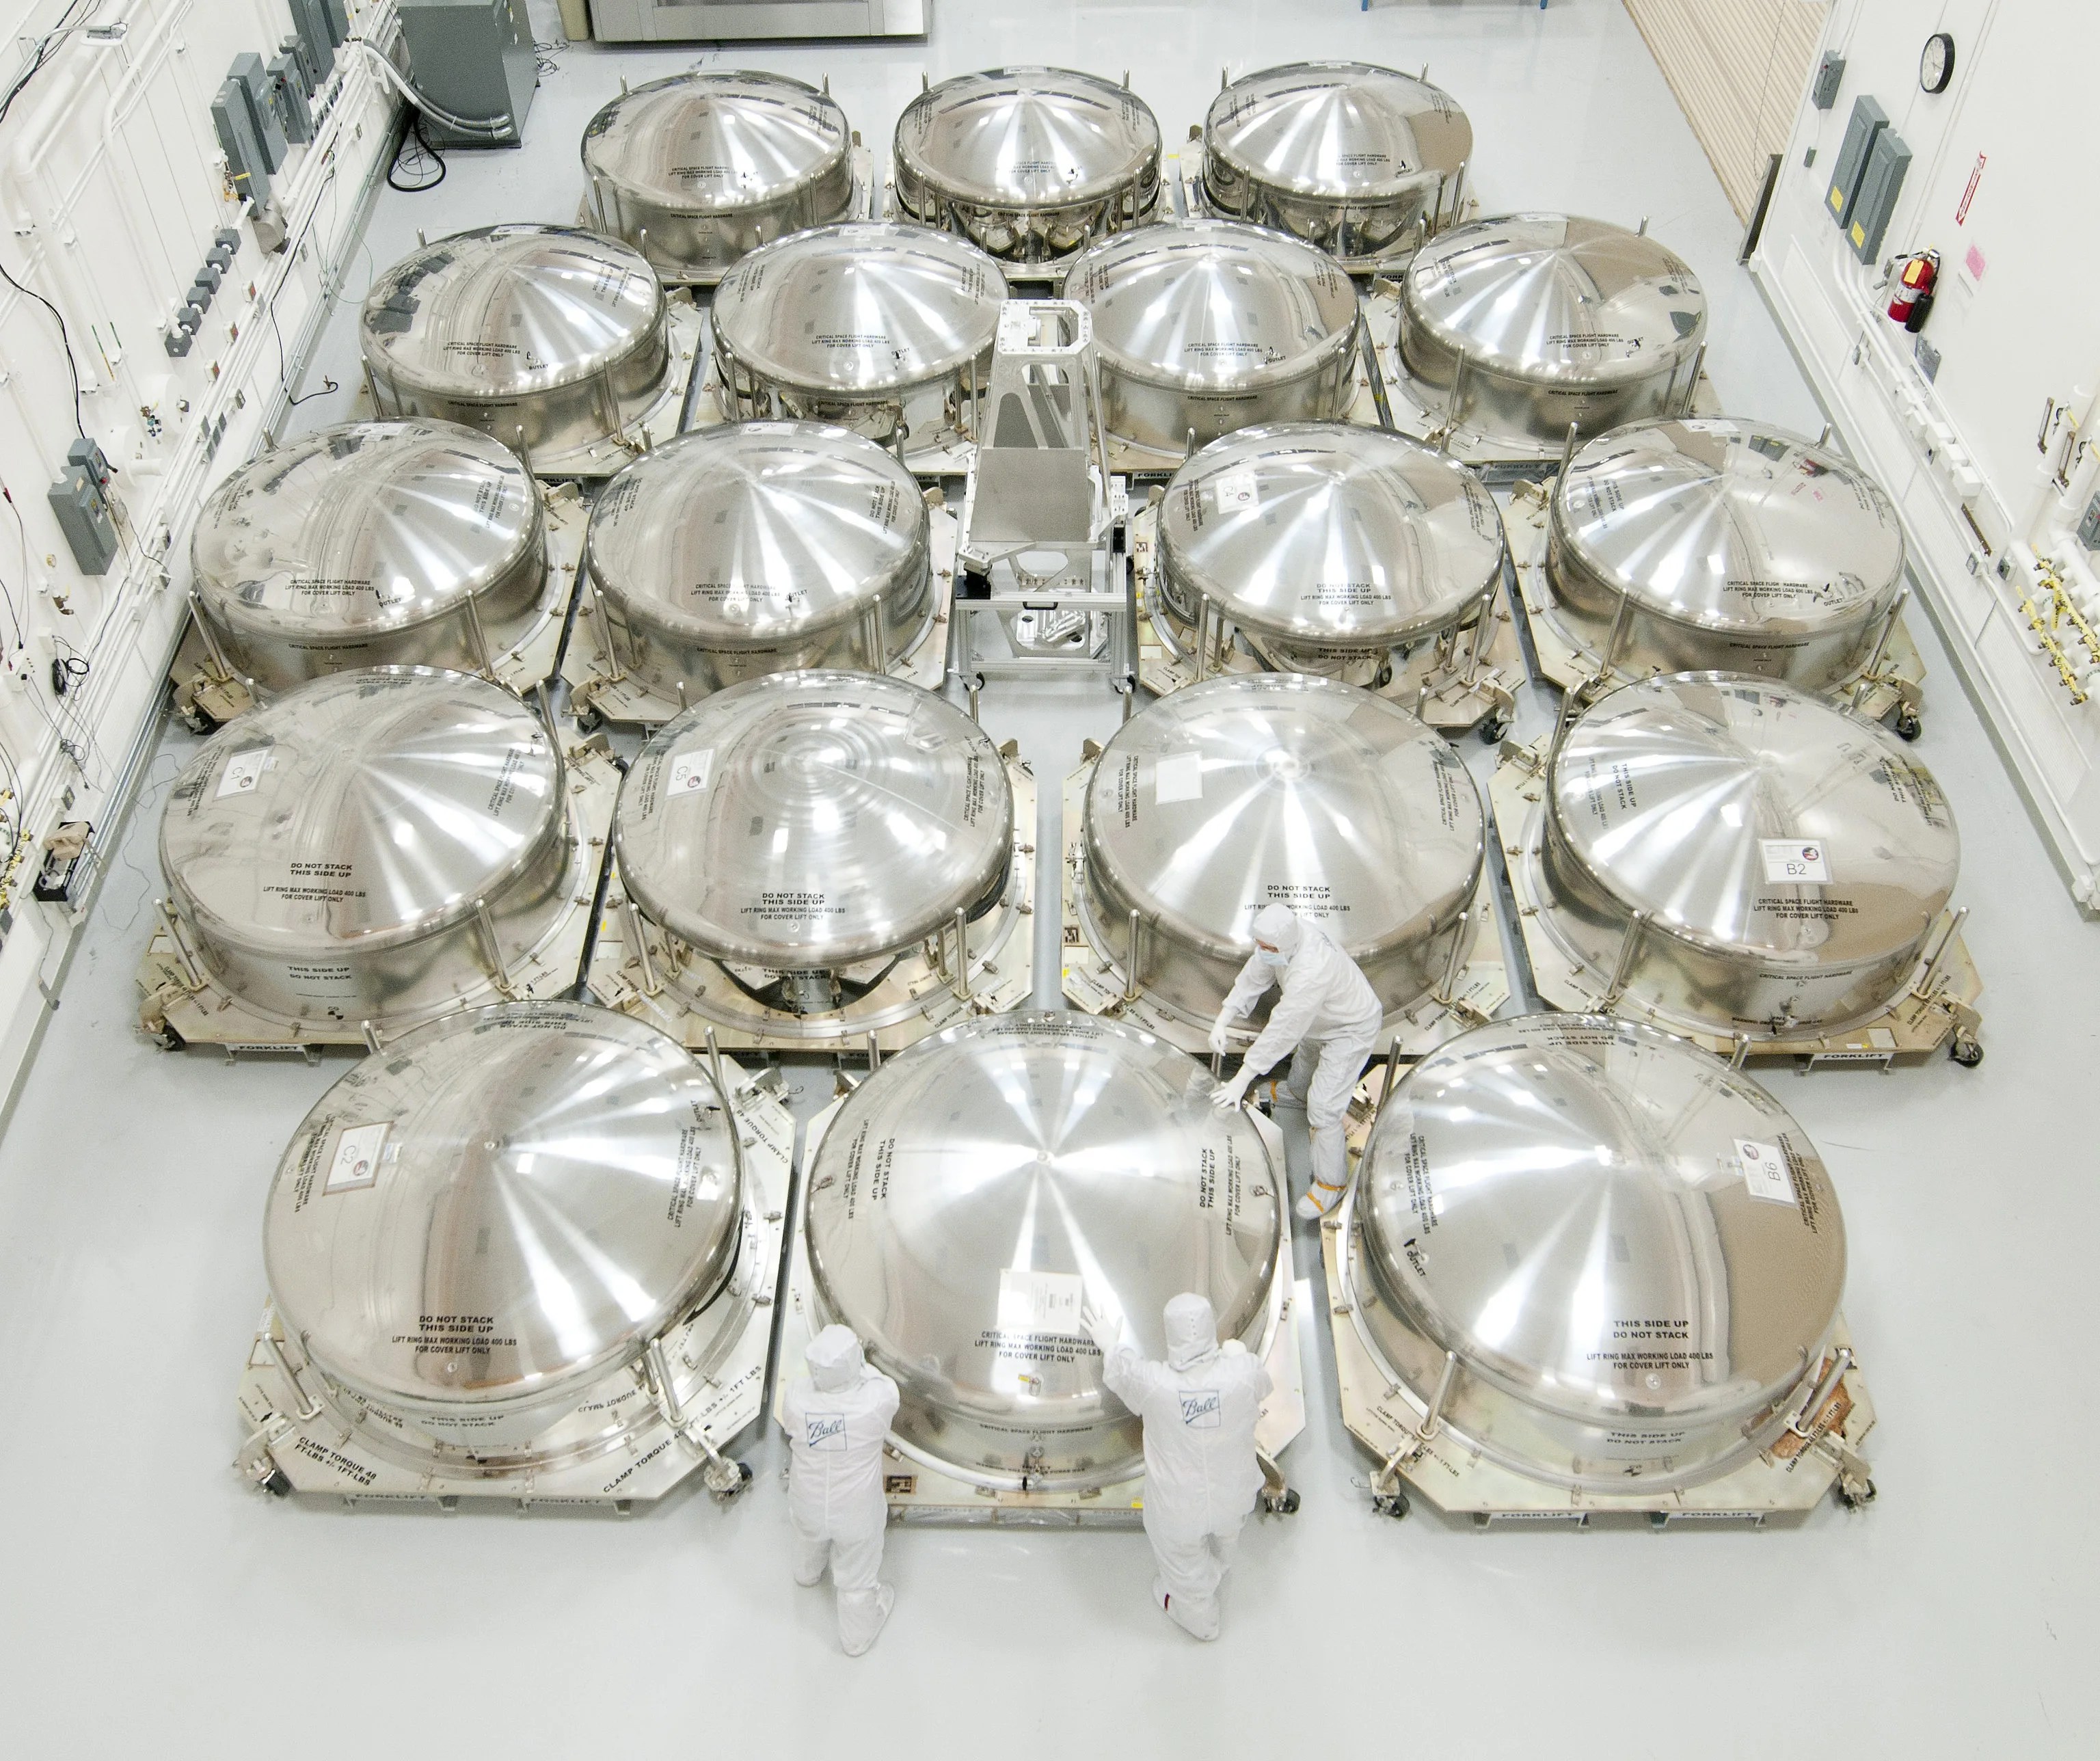 An image of the powerful primary mirrors of the James Webb Space Telescope